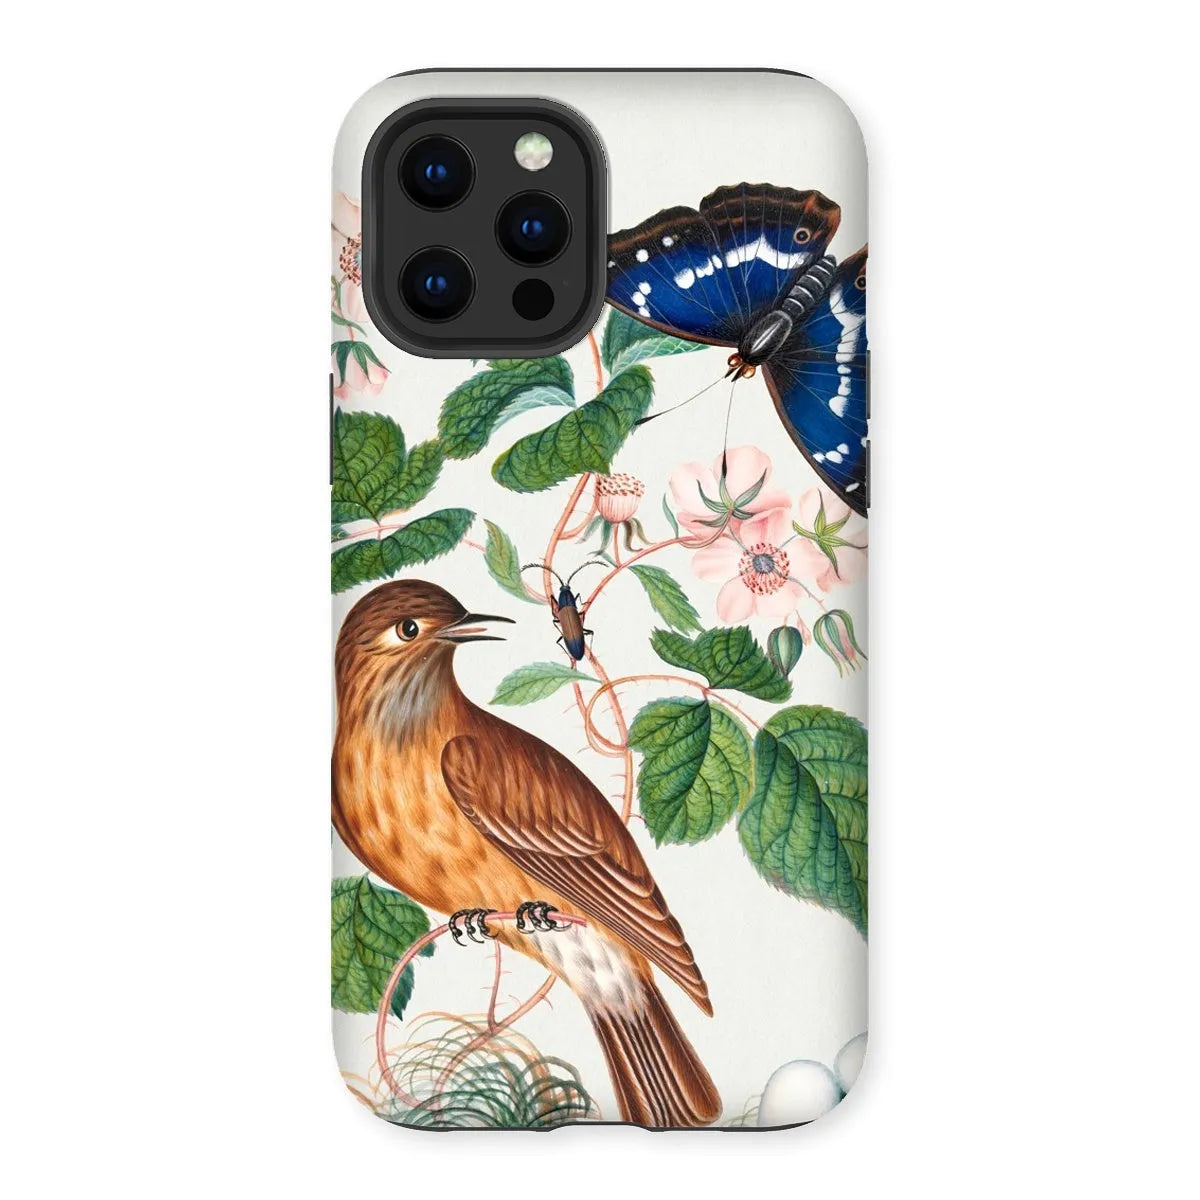 Flycatcher Emperor And Beetle - Art Phone Case - James Bolton - Iphone 12 Pro Max / Matte - Mobile Phone Cases